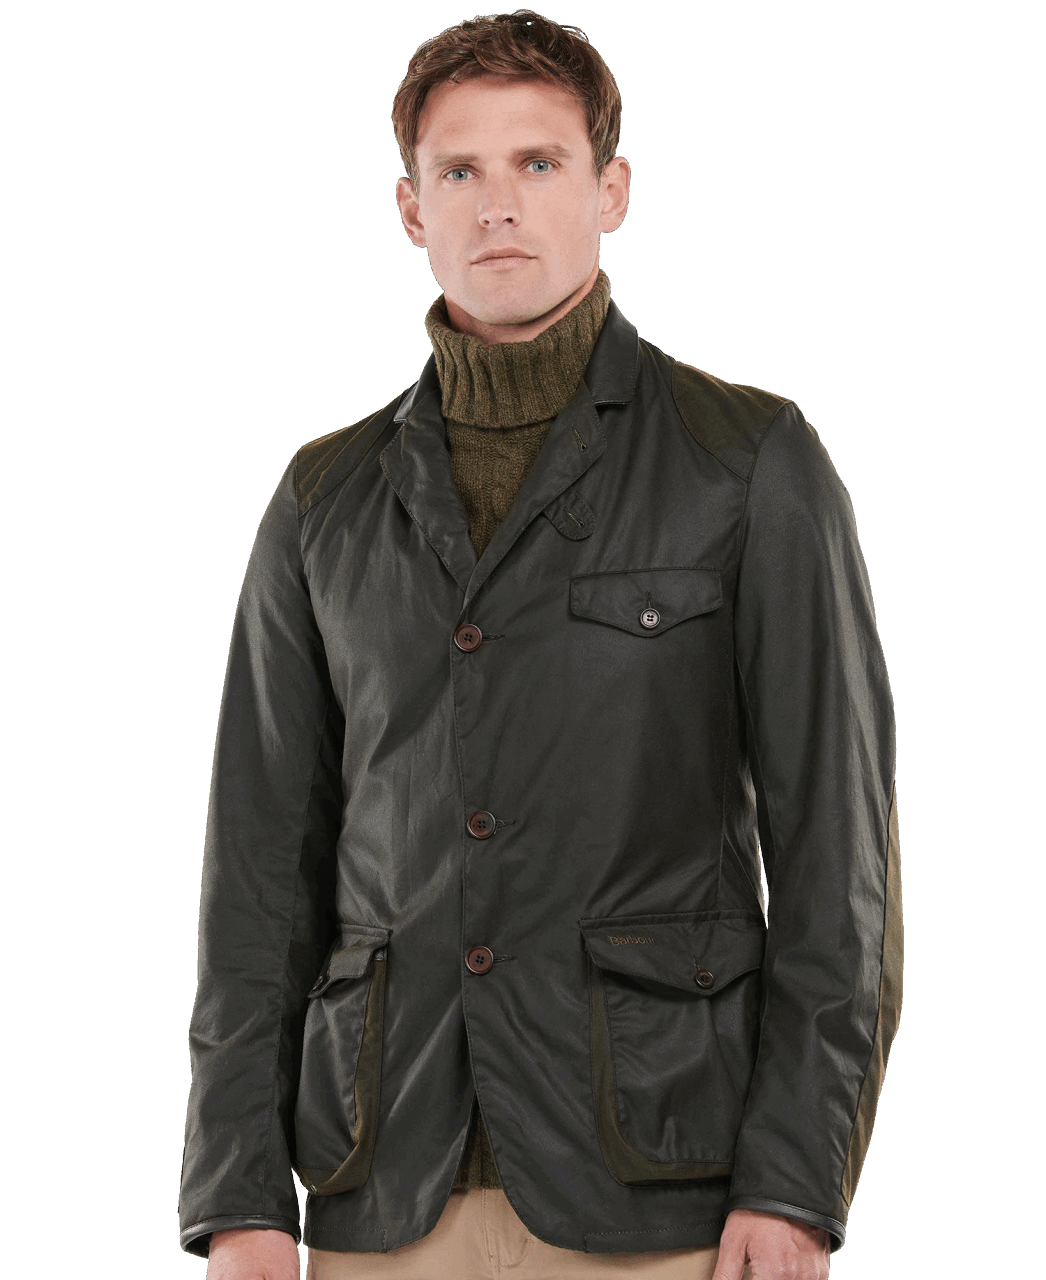 Barbour Beacon Sports Jacket - olive